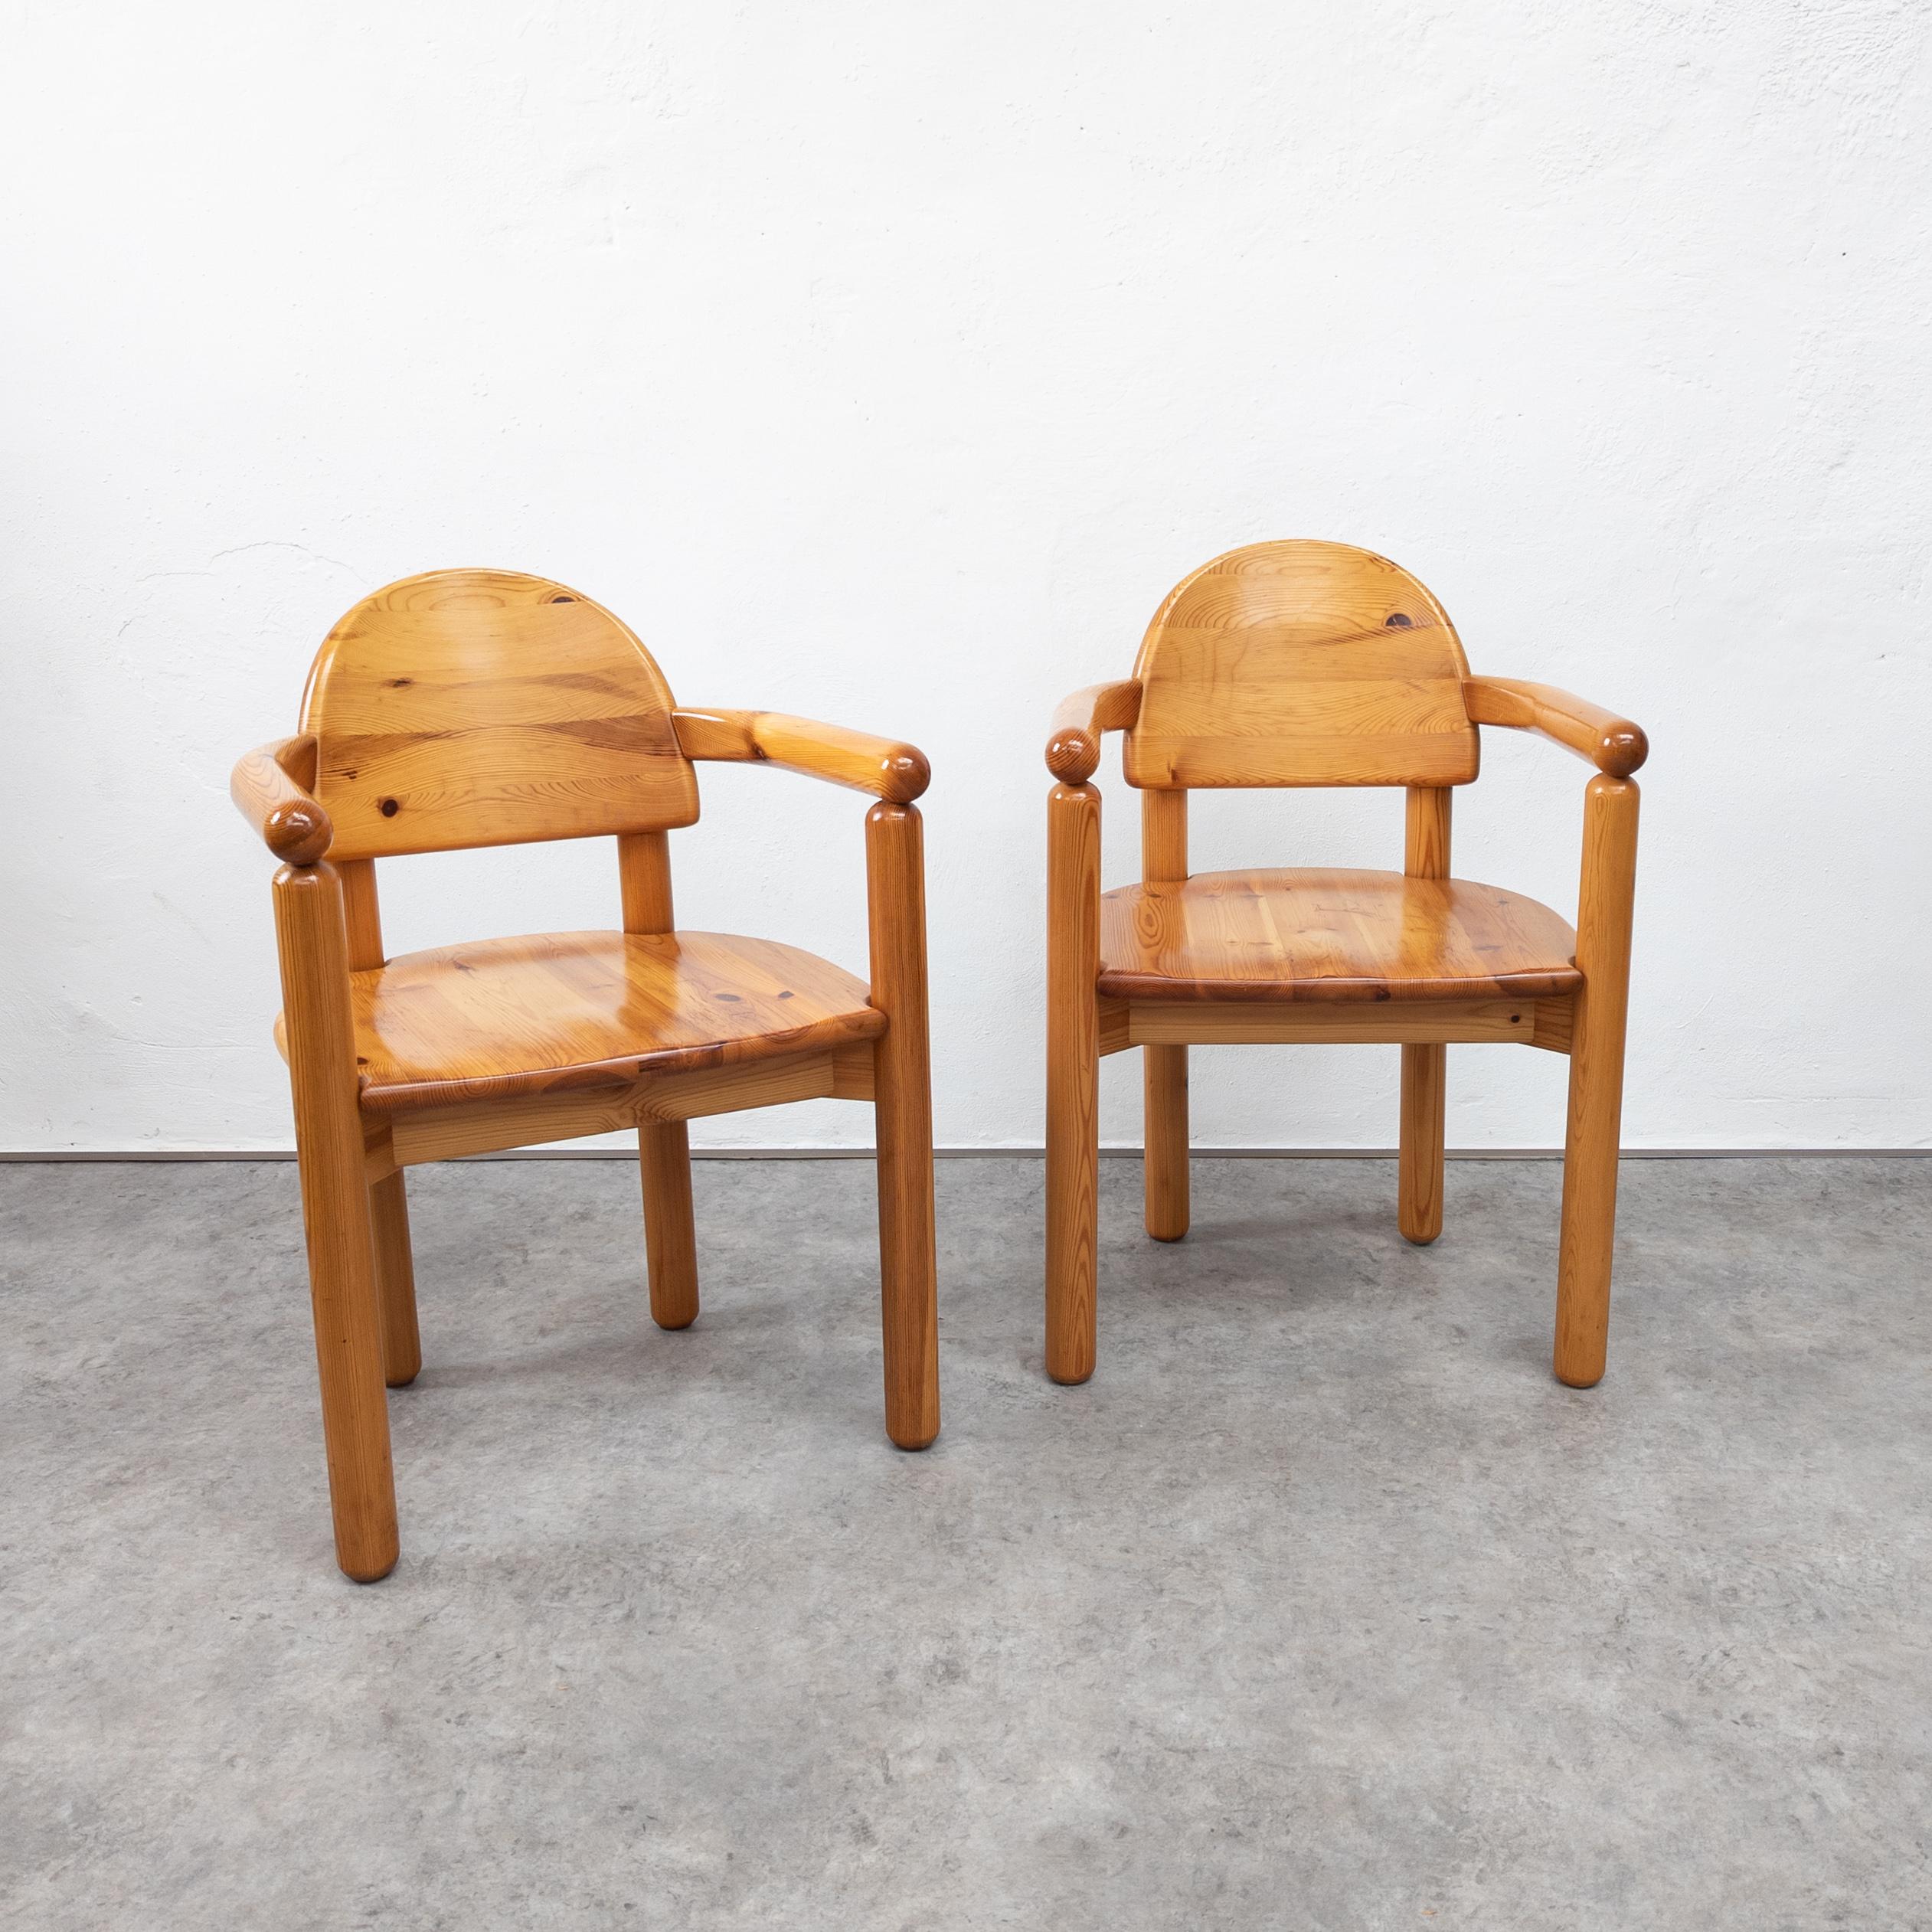 Set of 2 dining chairs / armchairs by Danish architect Rainer Daumiller for Hirtshals Sawmill, Denmark, 1970s. Made of solid lacquered pine wood with beautiful texture. Organically designed dining chairs with curved backrest which fluently runs into